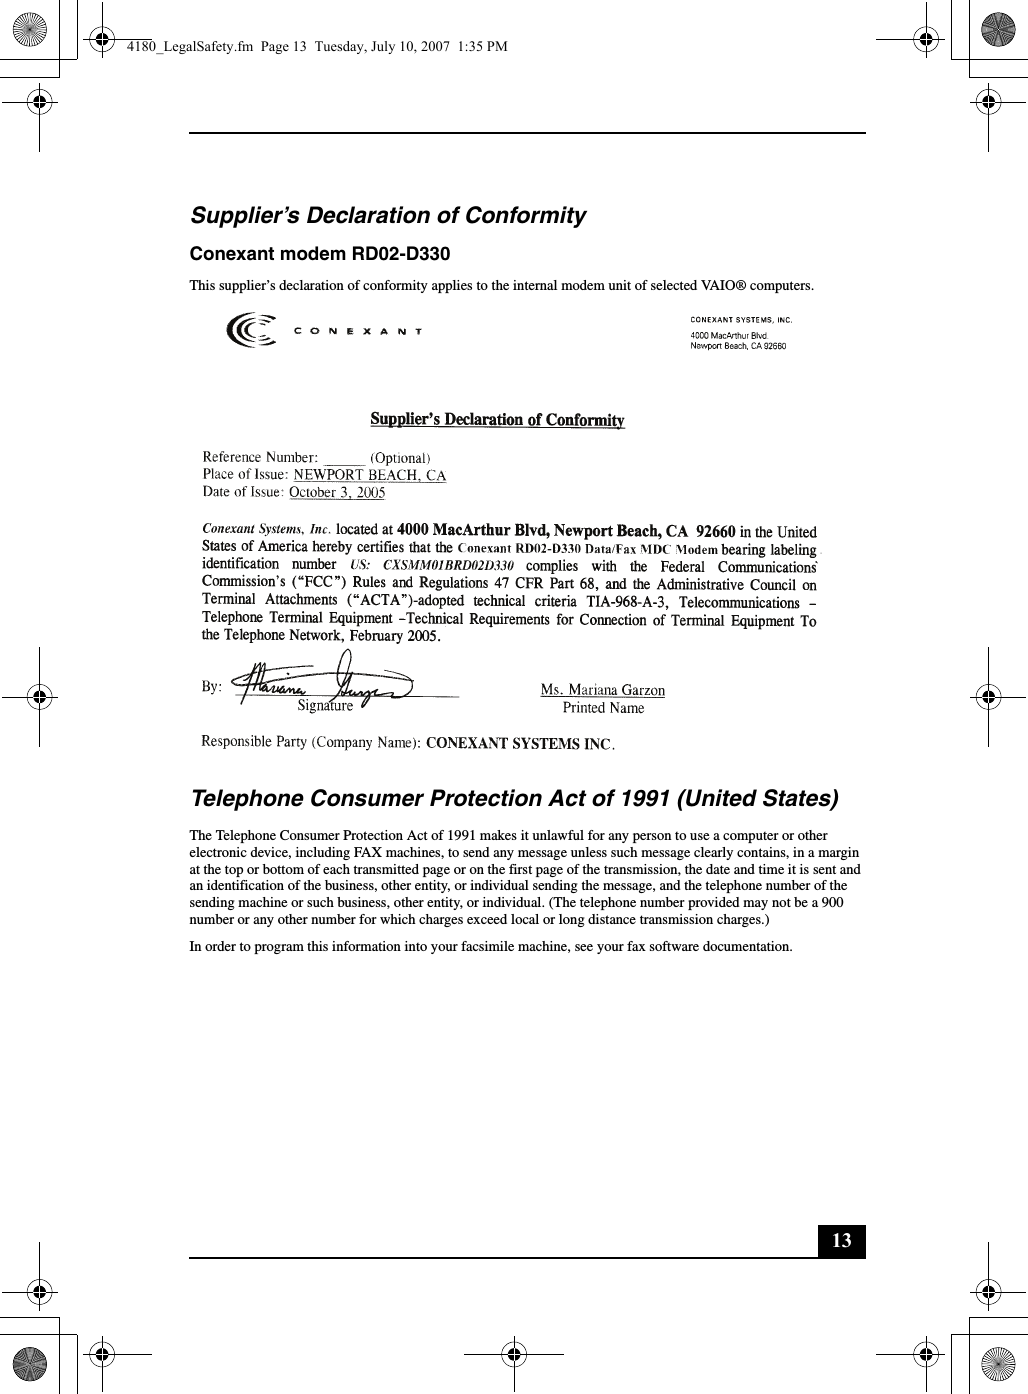 13Supplier’s Declaration of ConformityConexant modem RD02-D330This supplier’s declaration of conformity applies to the internal modem unit of selected VAIO® computers.Telephone Consumer Protection Act of 1991 (United States) The Telephone Consumer Protection Act of 1991 makes it unlawful for any person to use a computer or other electronic device, including FAX machines, to send any message unless such message clearly contains, in a margin at the top or bottom of each transmitted page or on the first page of the transmission, the date and time it is sent and an identification of the business, other entity, or individual sending the message, and the telephone number of the sending machine or such business, other entity, or individual. (The telephone number provided may not be a 900 number or any other number for which charges exceed local or long distance transmission charges.)In order to program this information into your facsimile machine, see your fax software documentation.4180_LegalSafety.fm  Page 13  Tuesday, July 10, 2007  1:35 PM